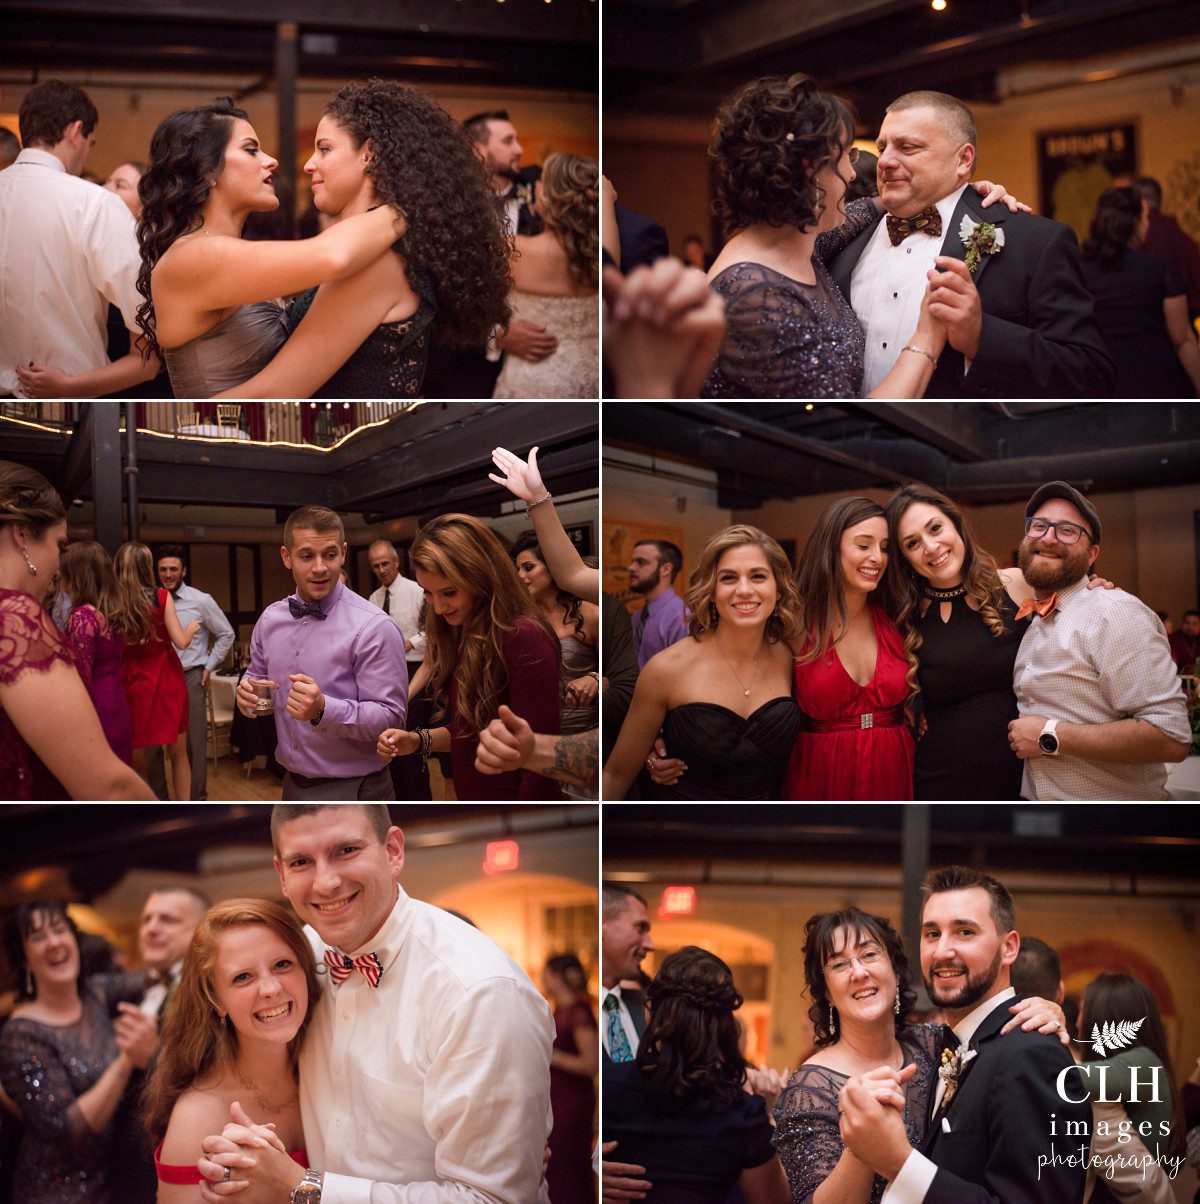 clh-images-photography-revolution-hall-wedding-revolution-hall-wedding-photography-troy-ny-wedding-brewery-wedding-erica-and-jeff-wedding-capital-district-wedding-photographer-181